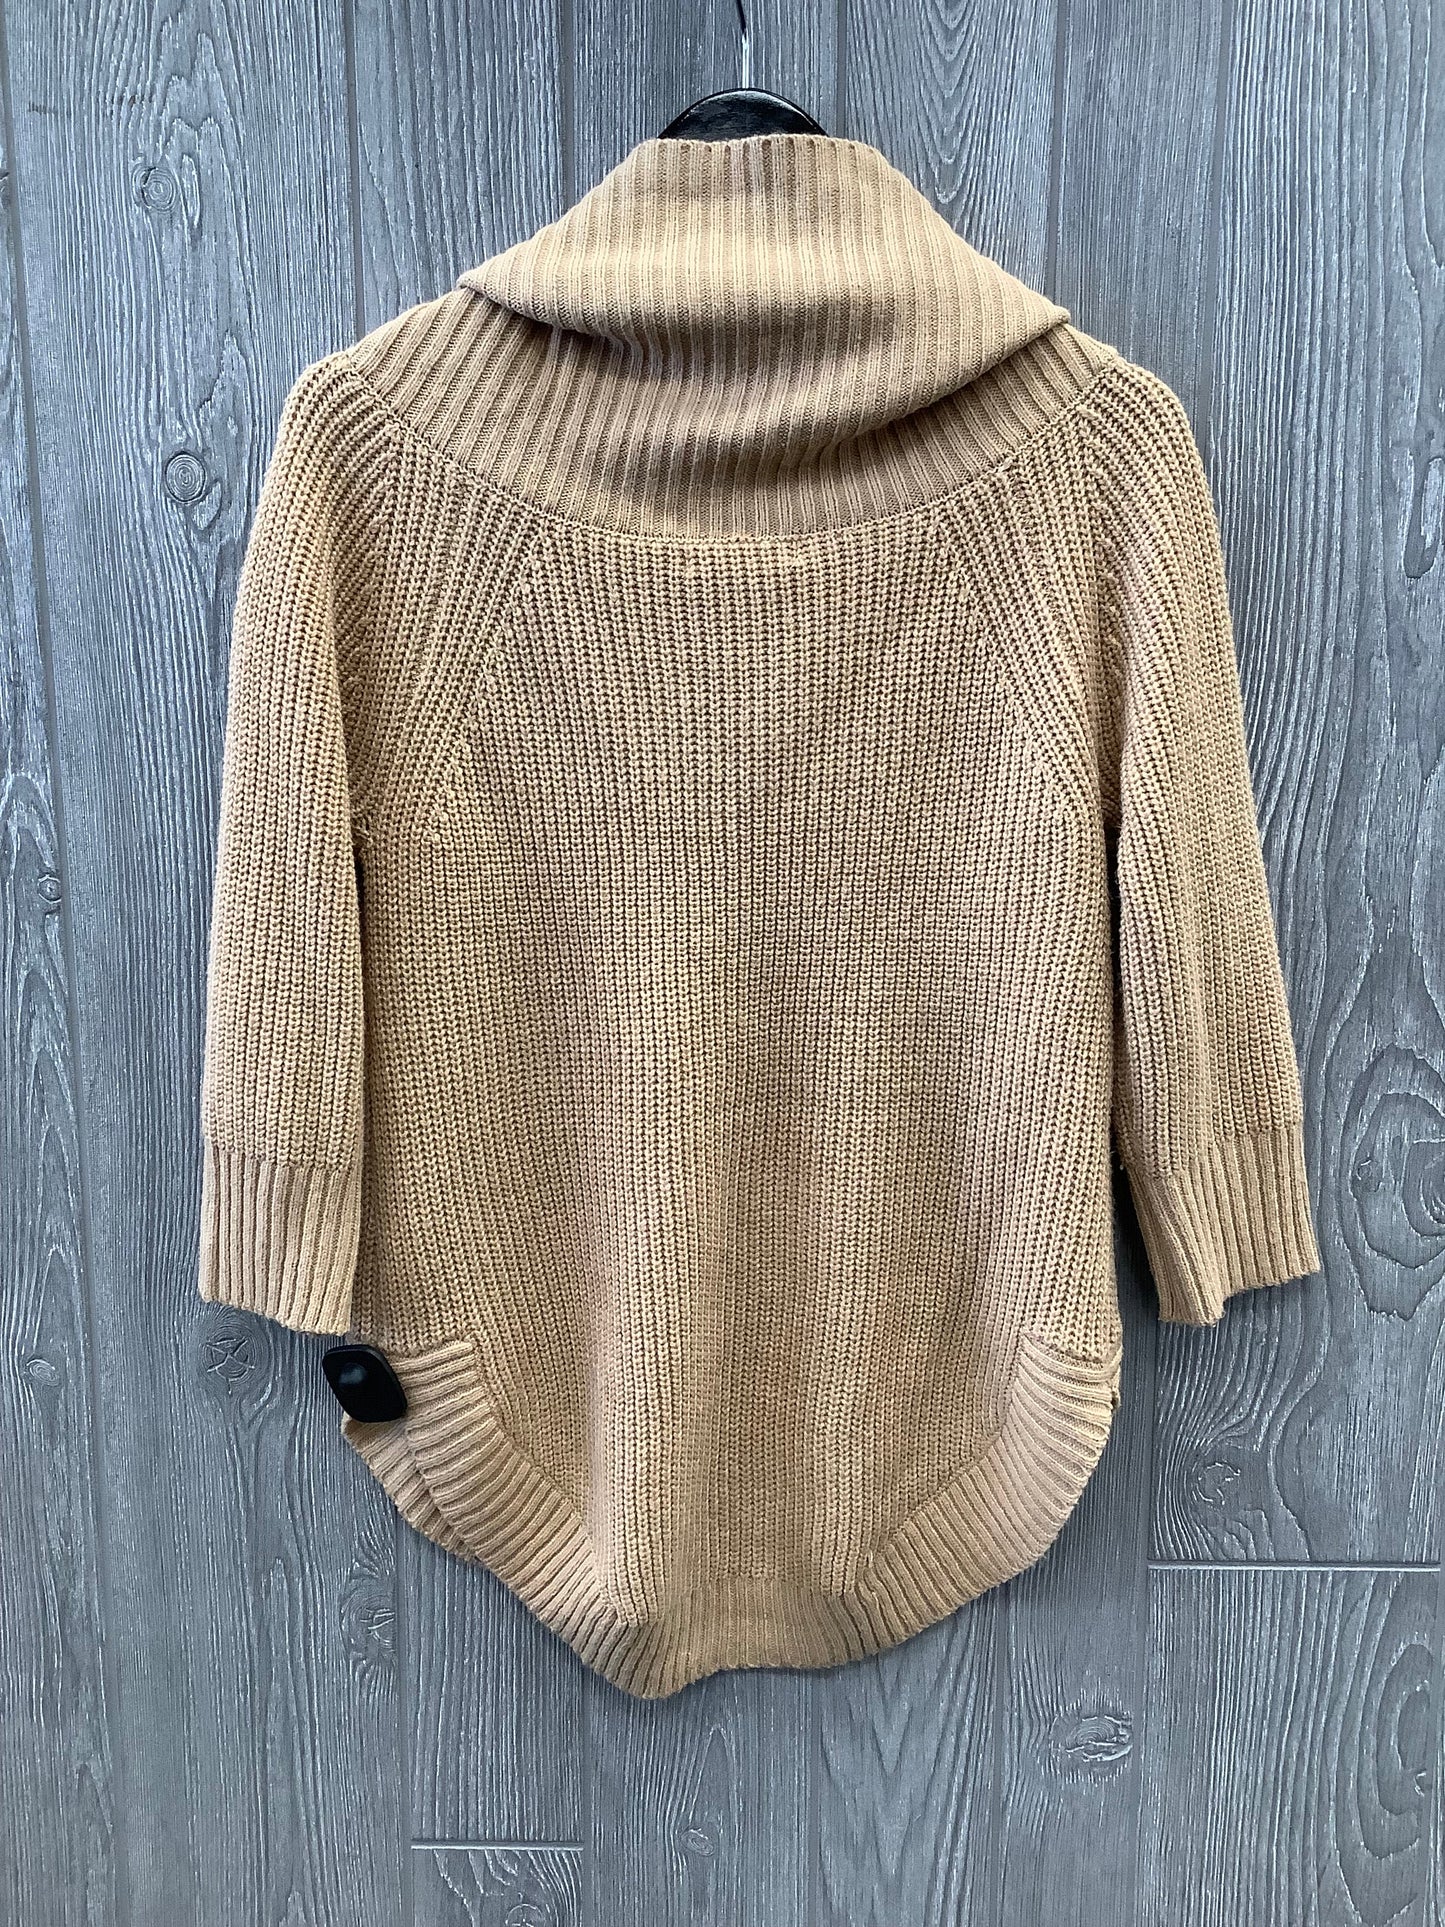 Sweater By 89th And Madison  Size: Petite   Small